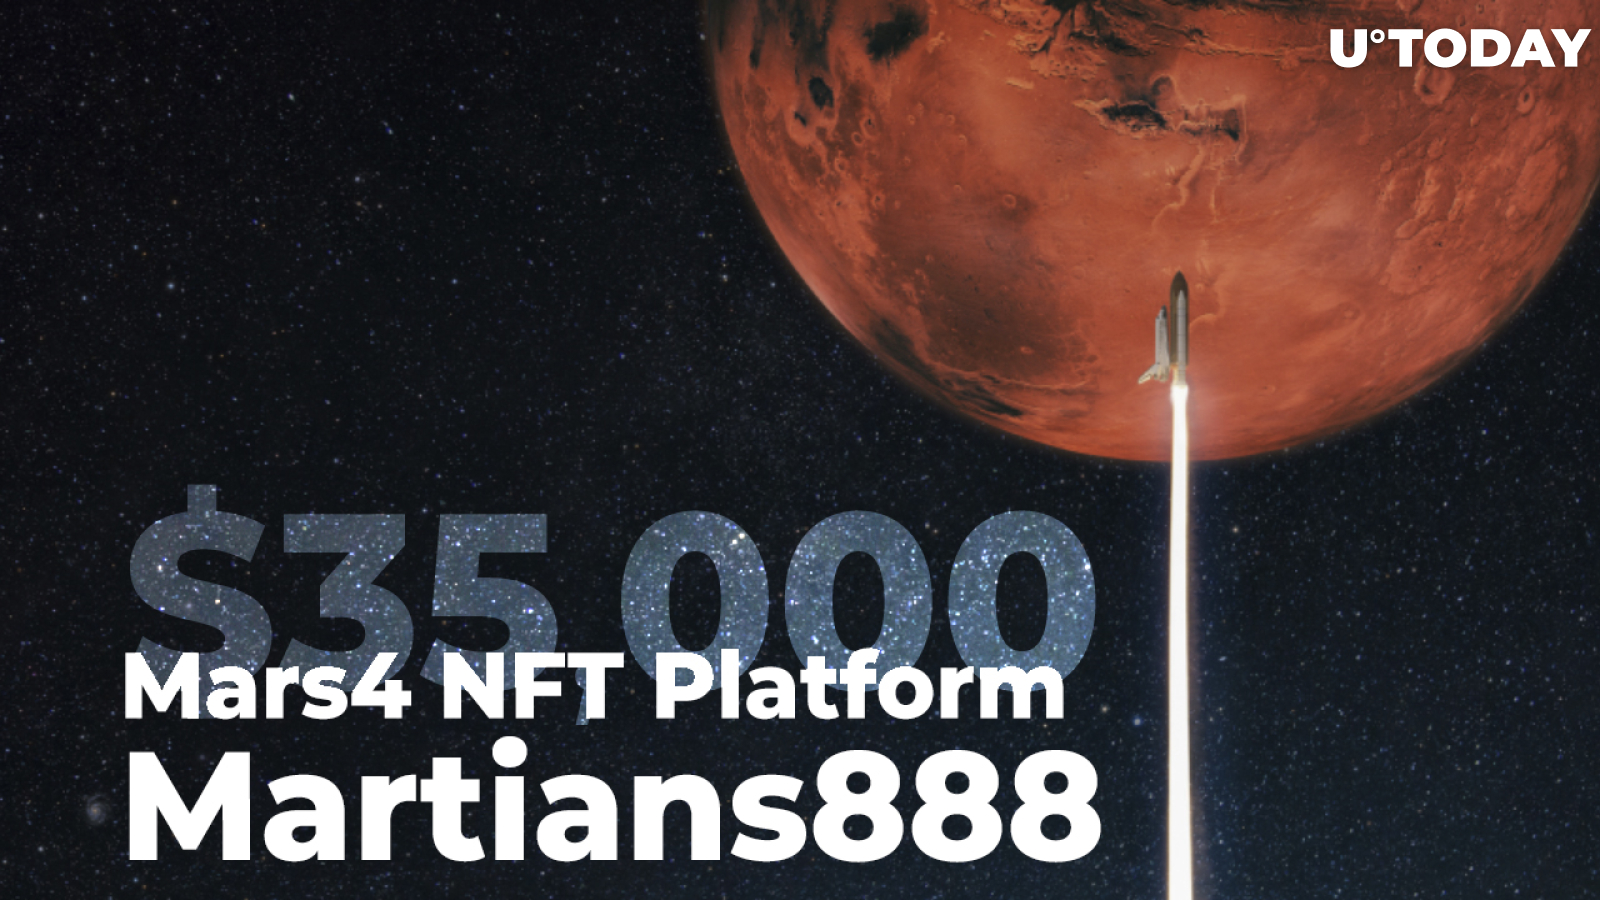 Mars4 NFT Platform Launches Martians888 Art Contest for Everyone with $35,000 at Stake